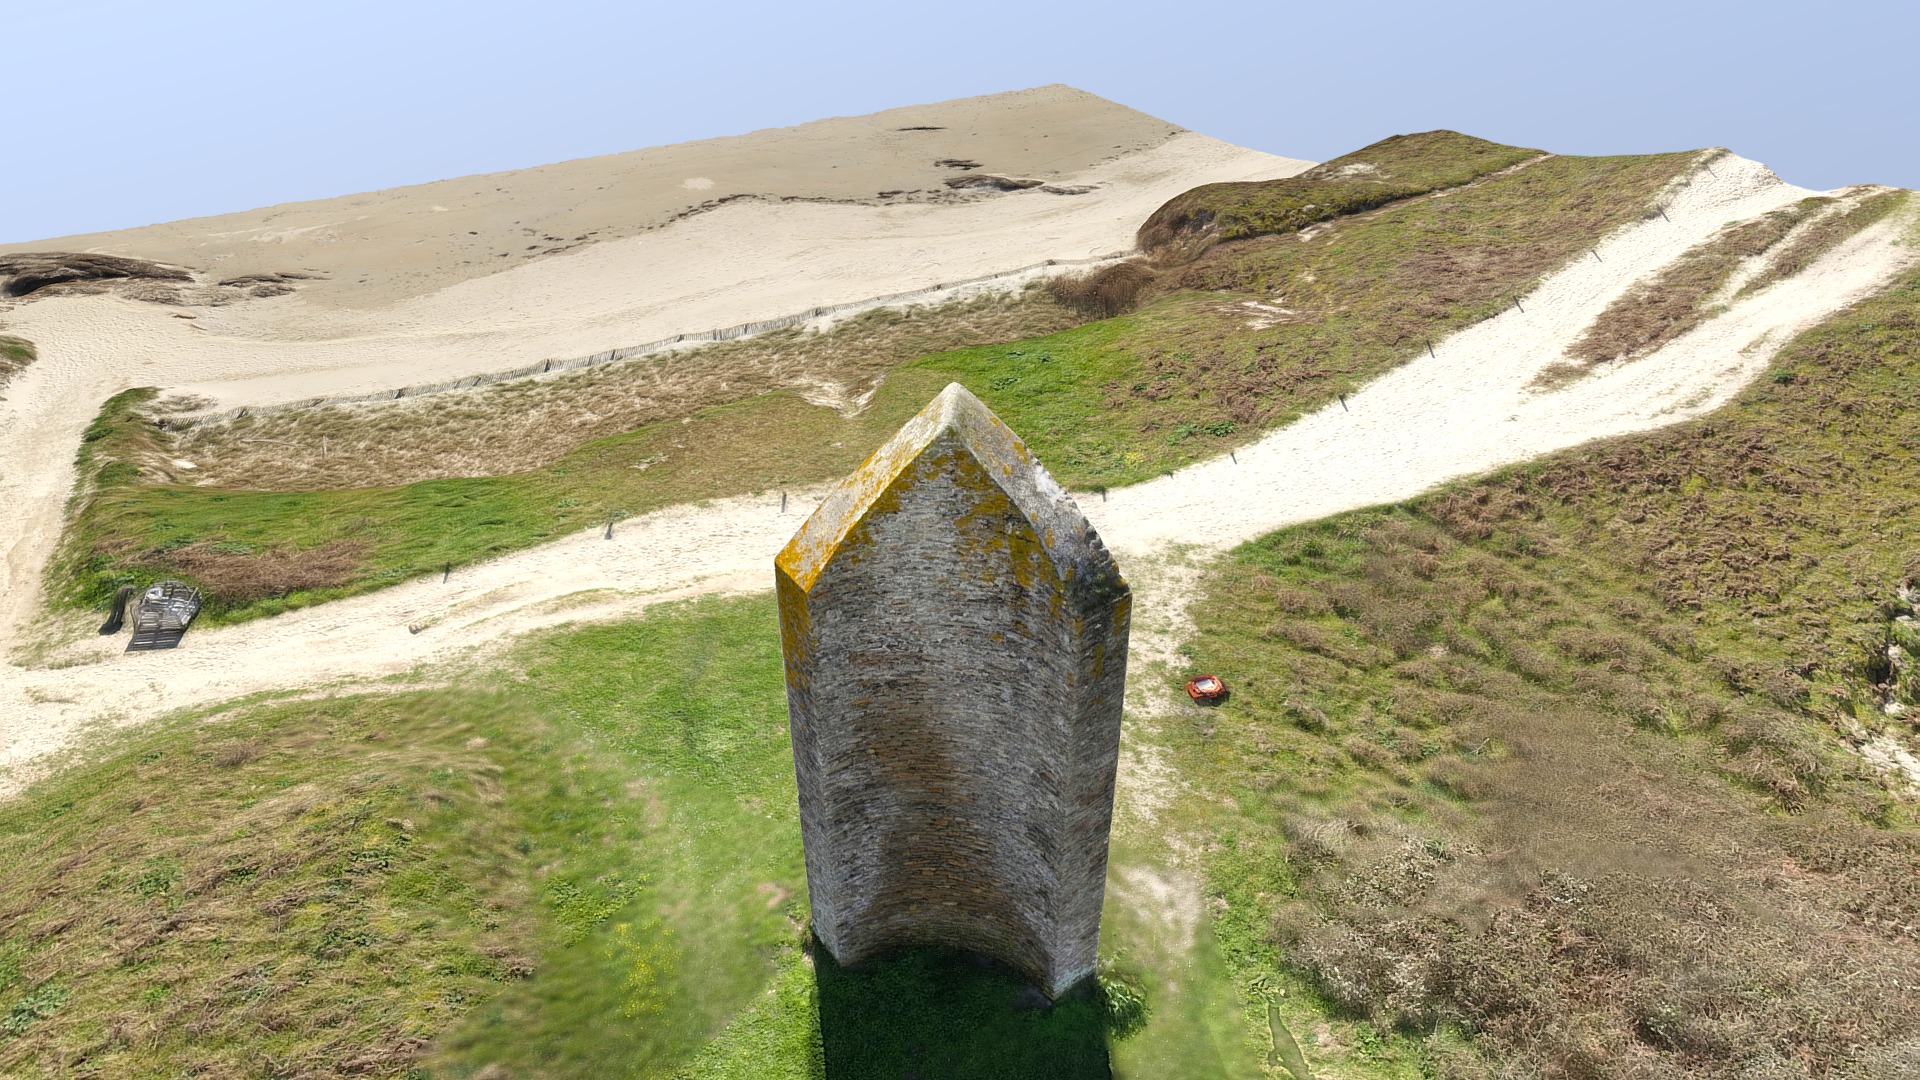 3D model Amer et plage de Raguenez – France - This is a 3D model of the Amer et plage de Raguenez - France. The 3D model is about a stone structure in a grassy area.